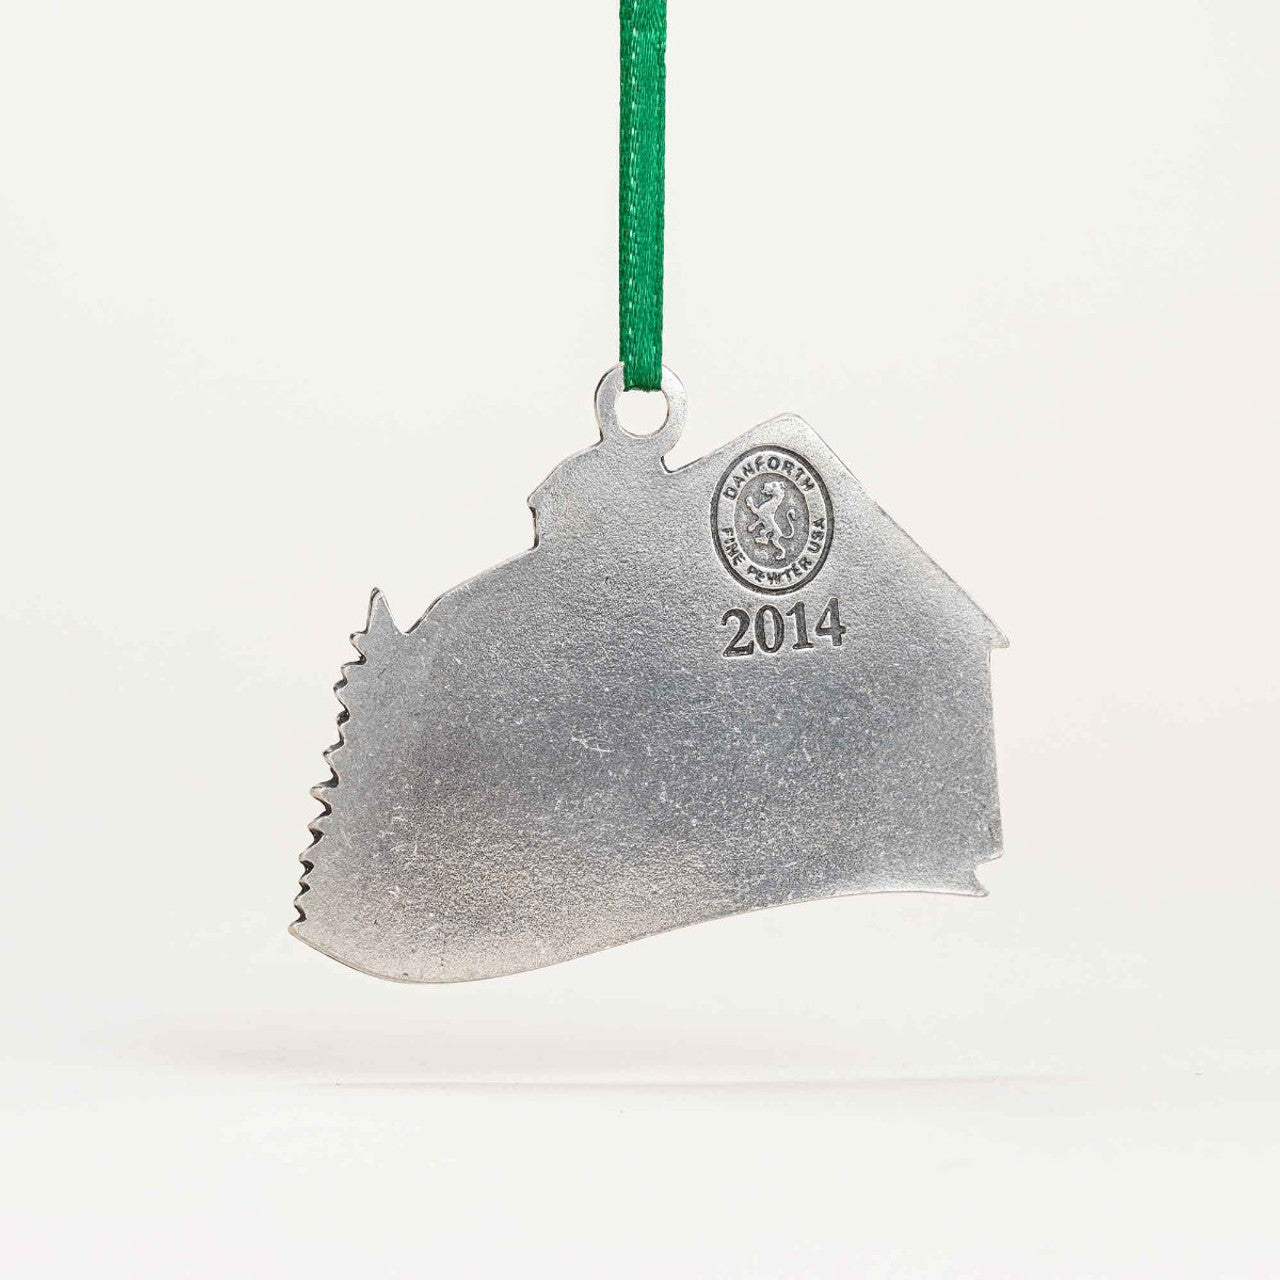 Danforth Pewter "A good night" ornament back view